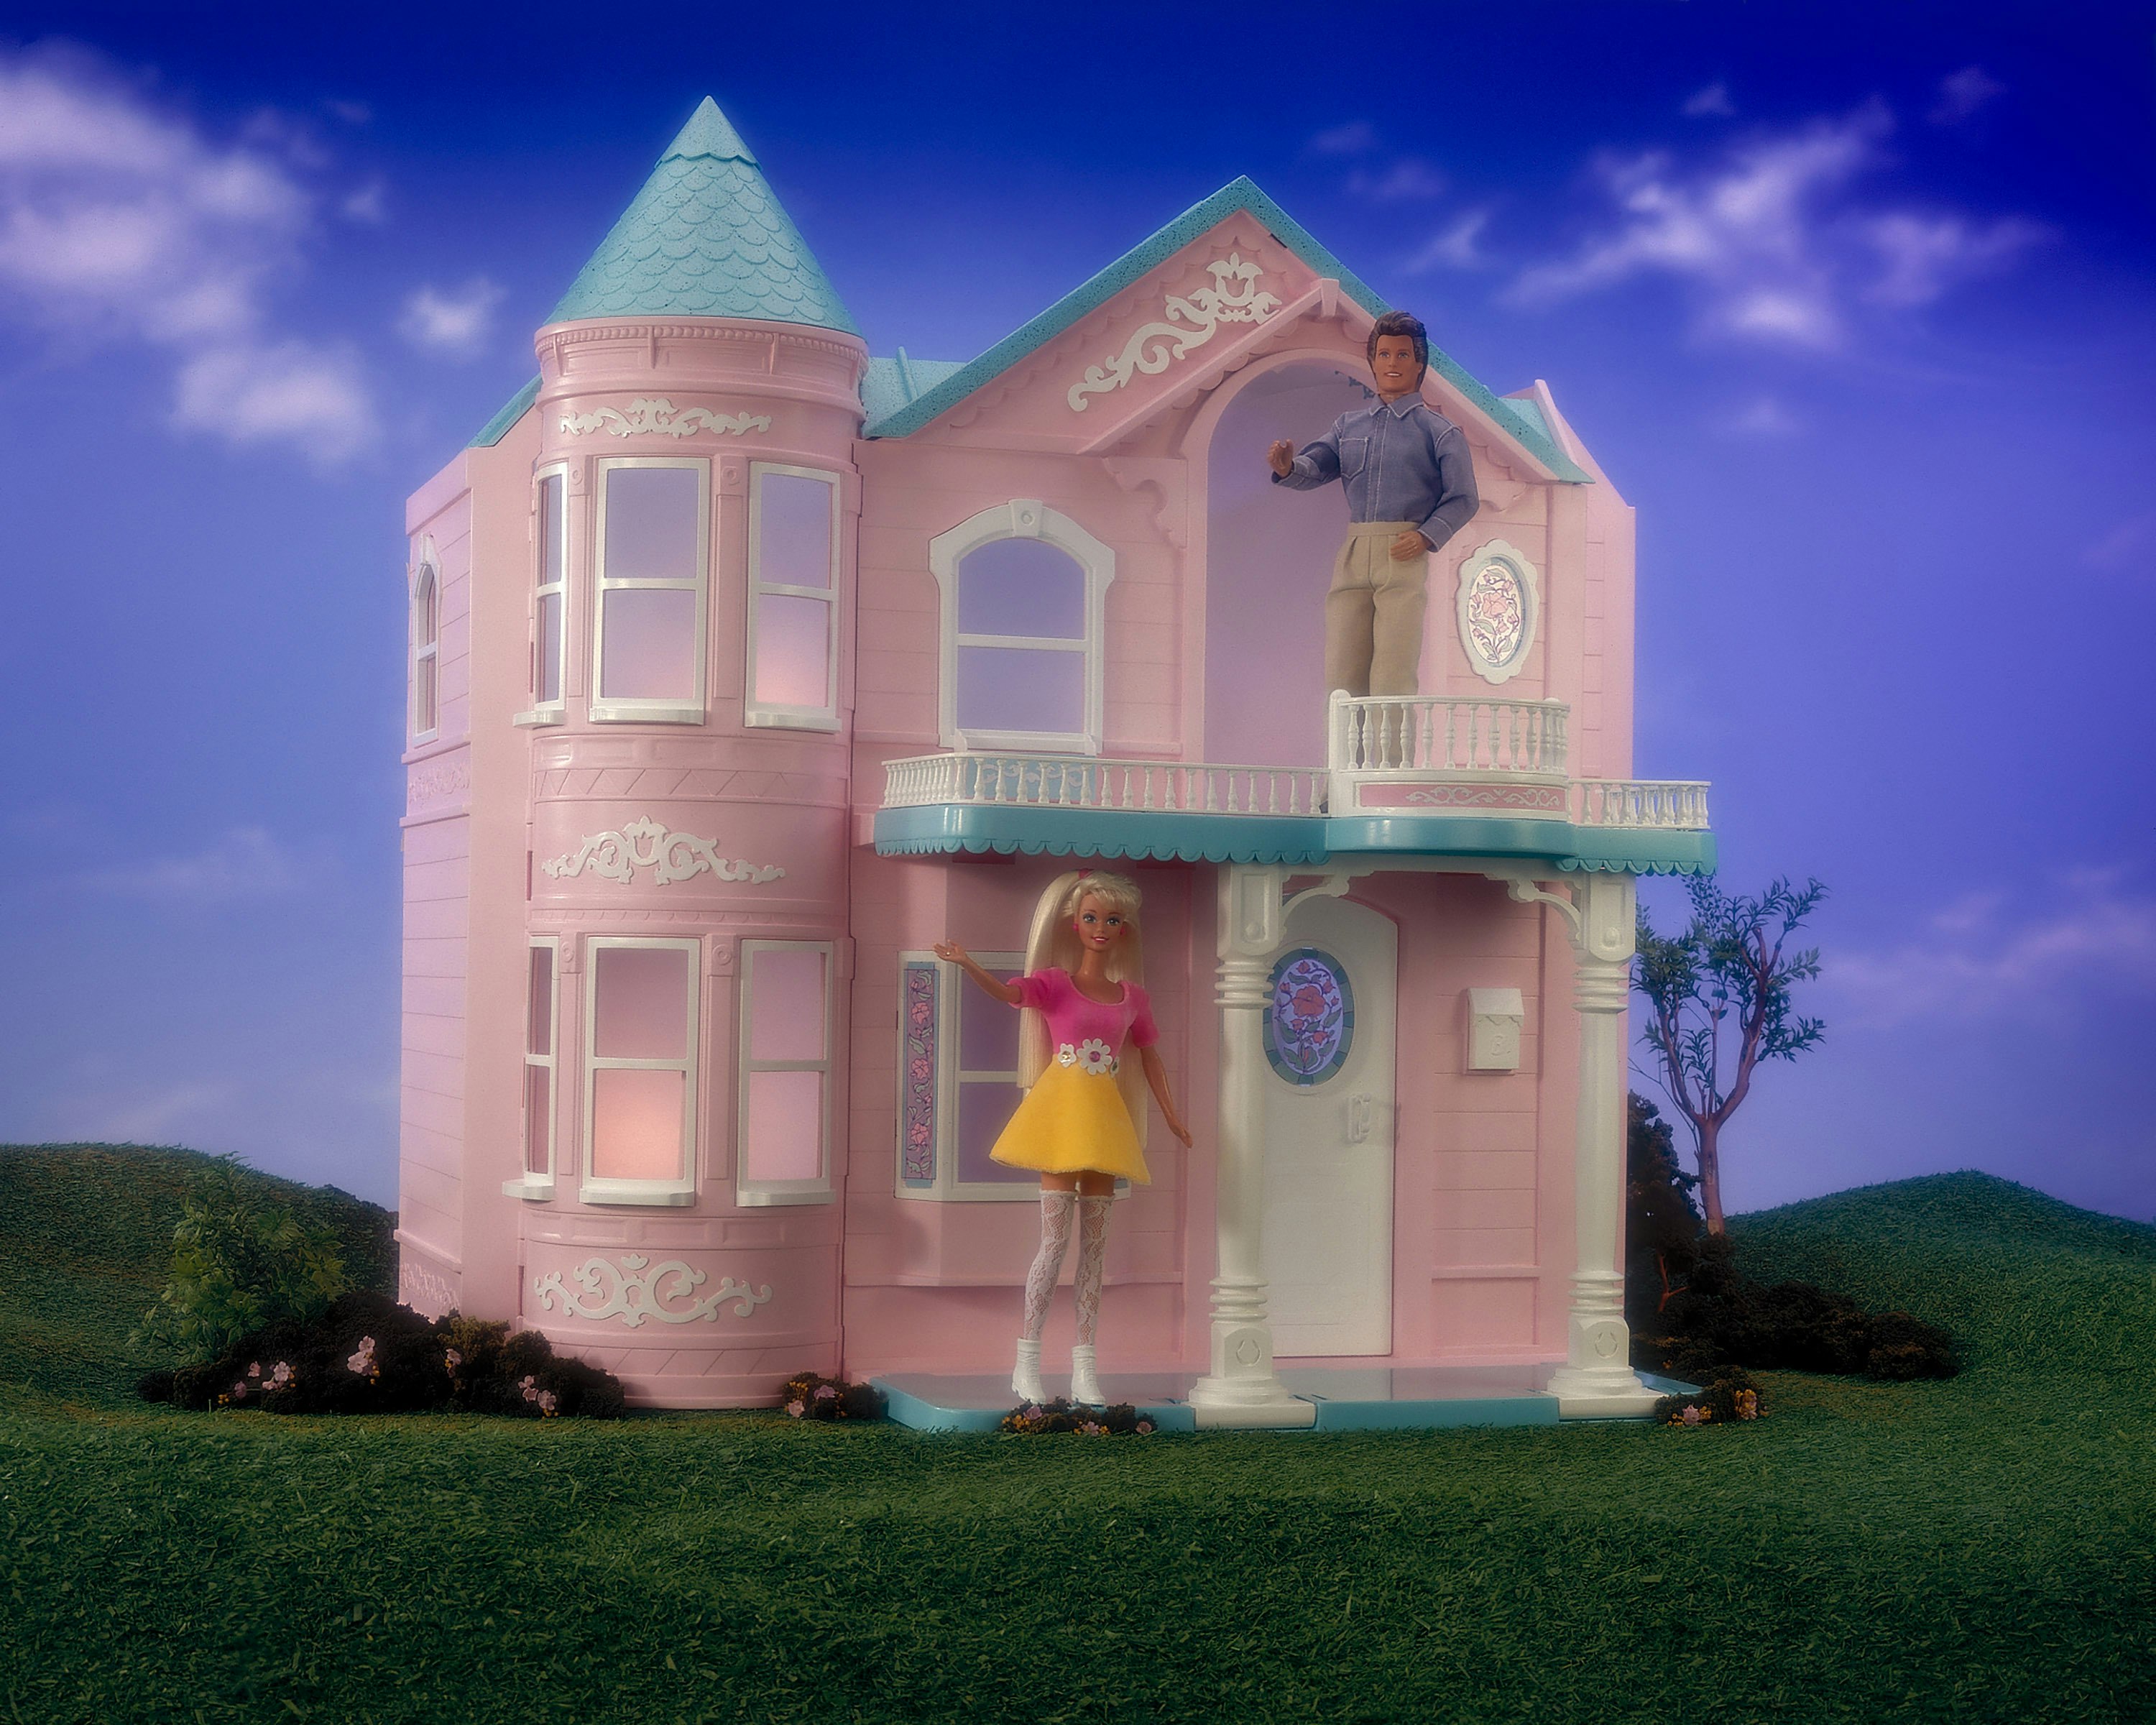 is there a way to fold the dreamhouse once it's been assembled